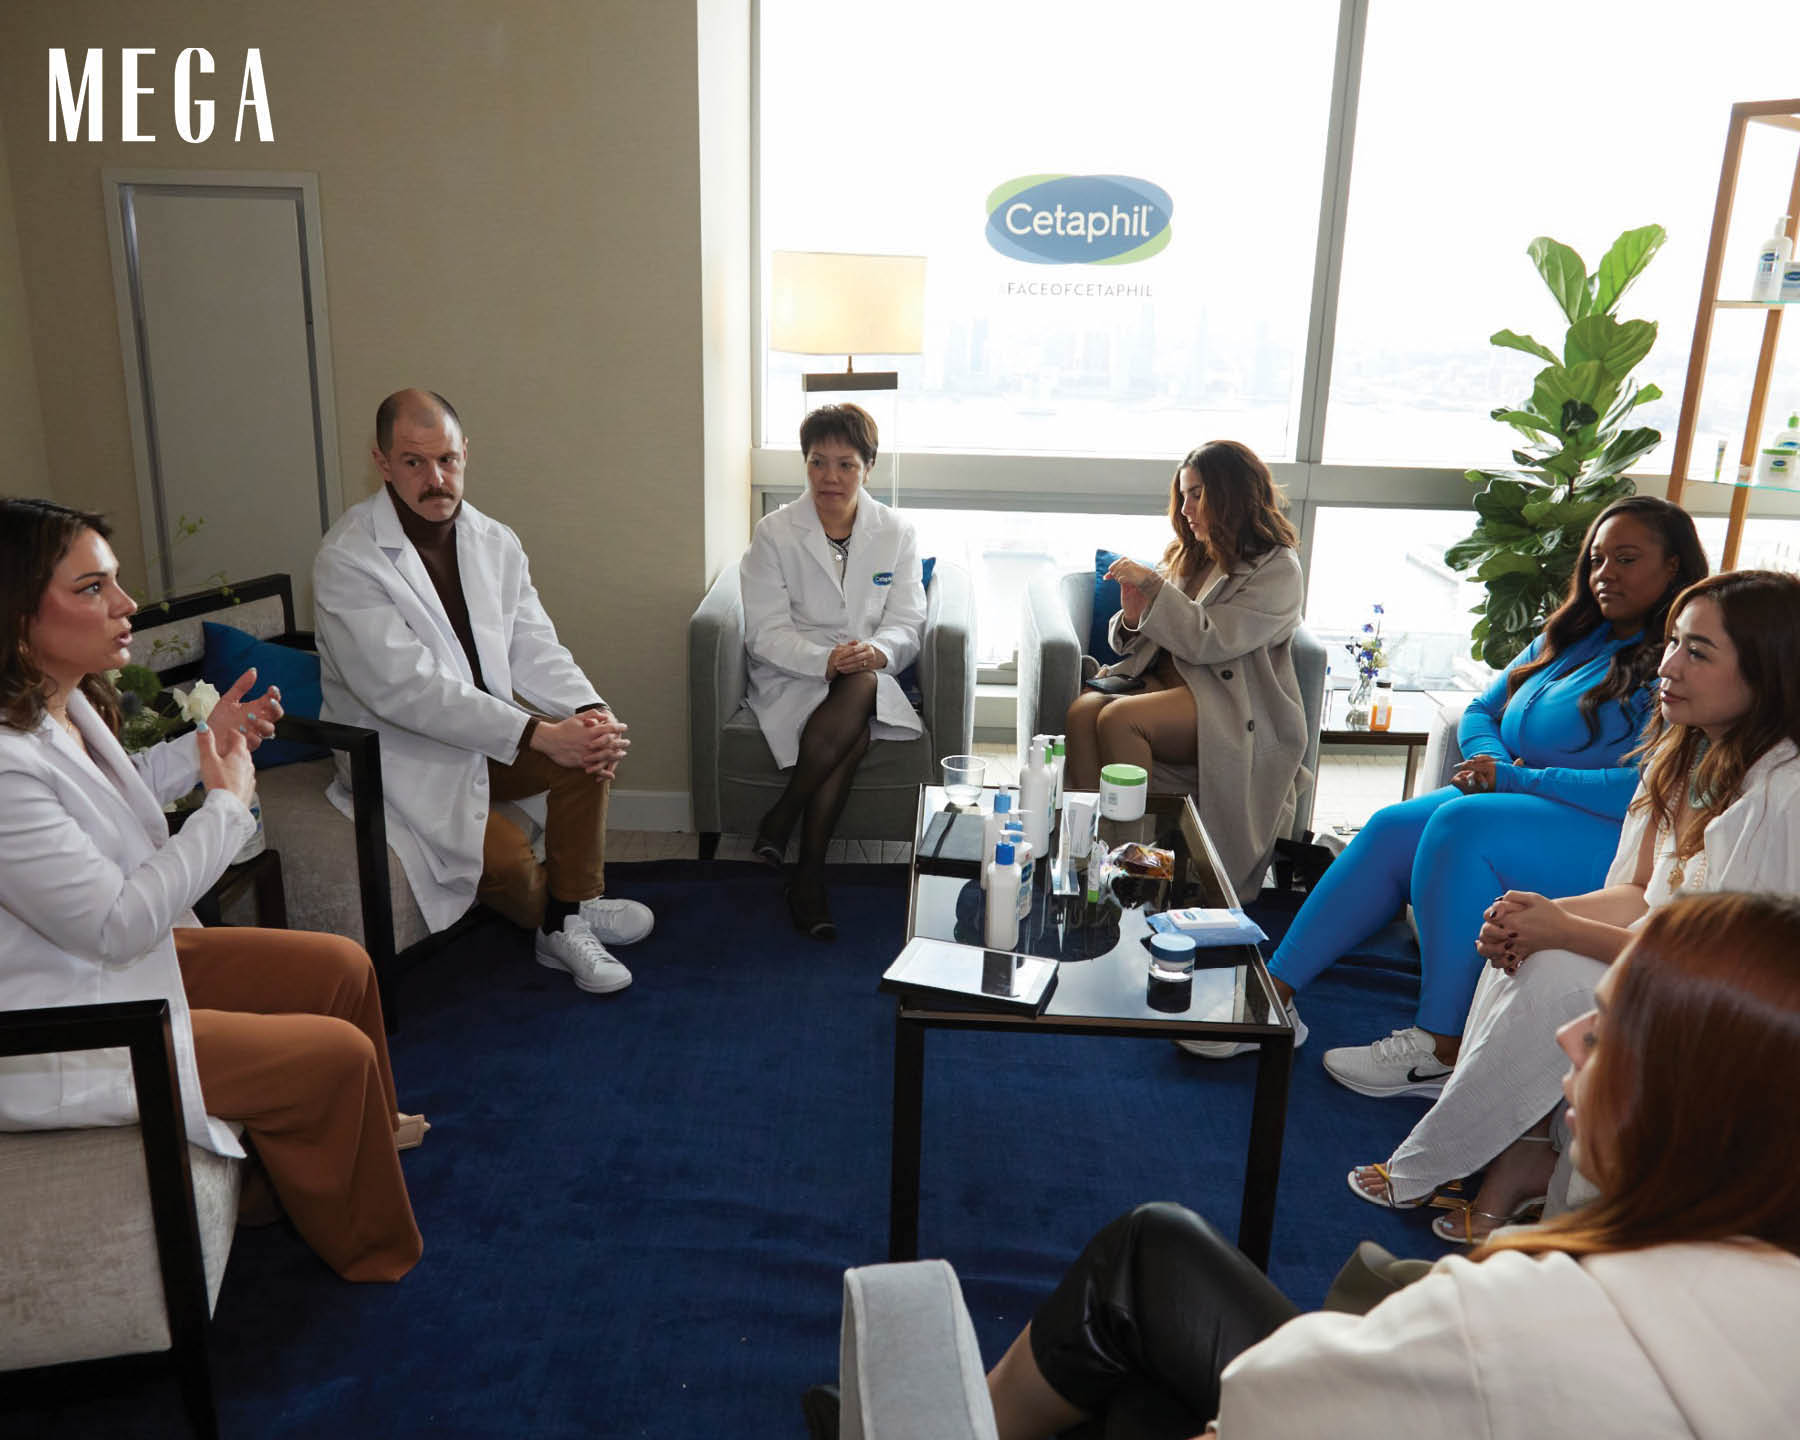 A discussion was held with team Cetaphil and dermatology experts